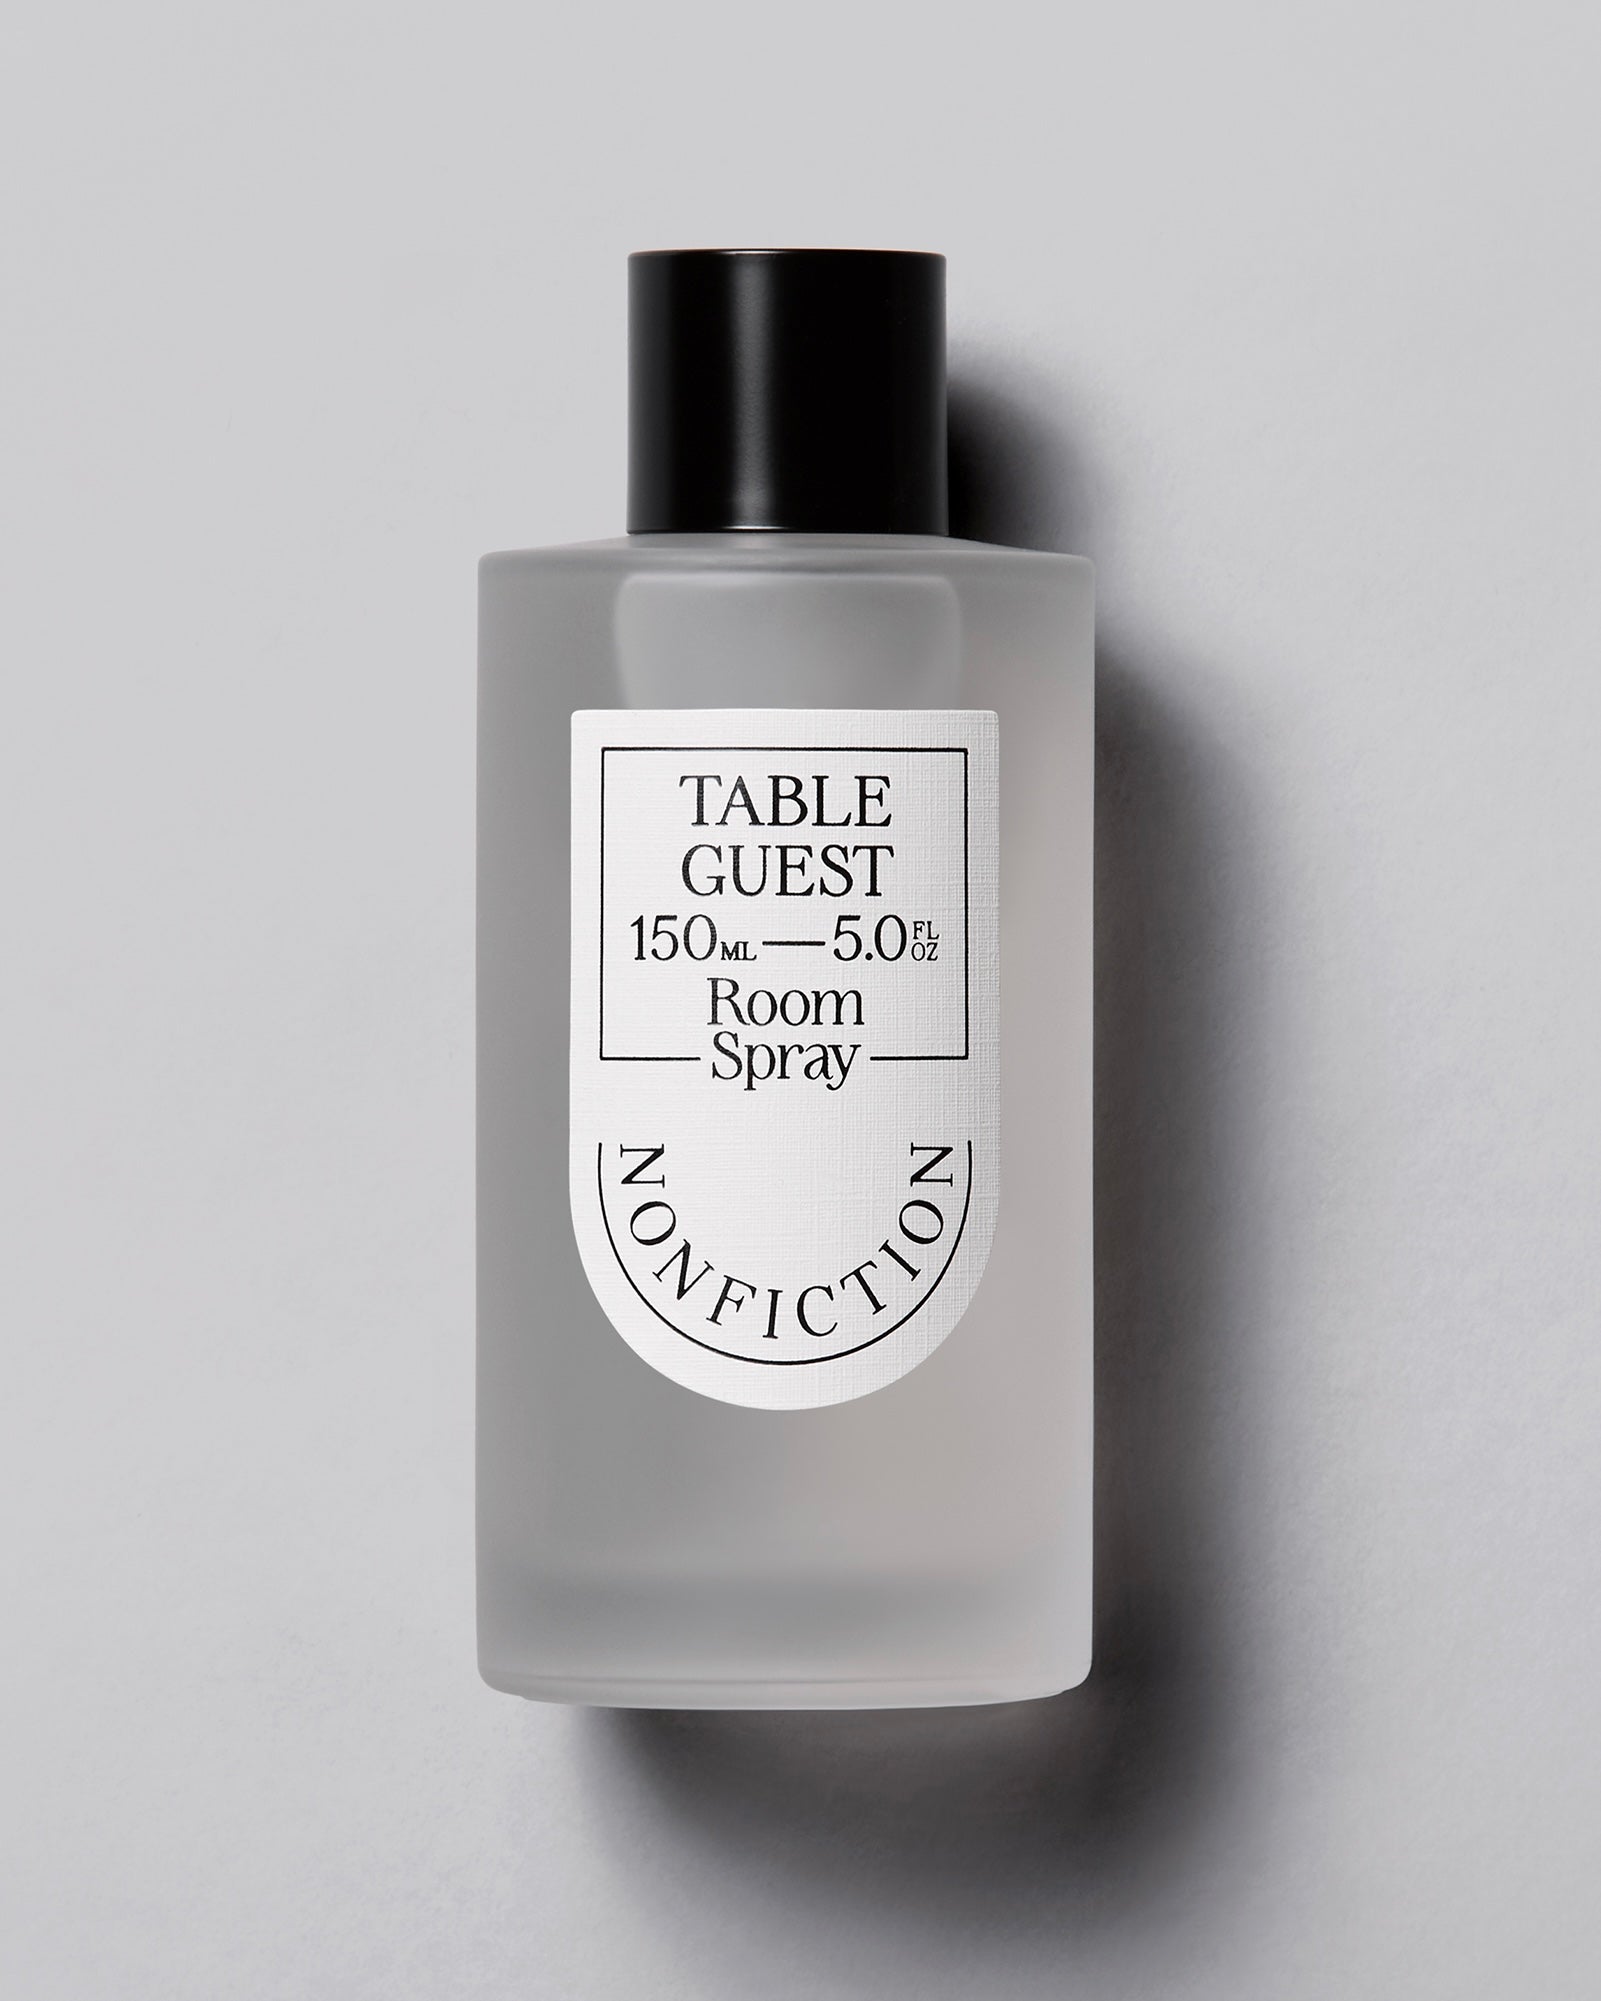 【NONFICTION】TABLE GUEST ROOM SPRAY